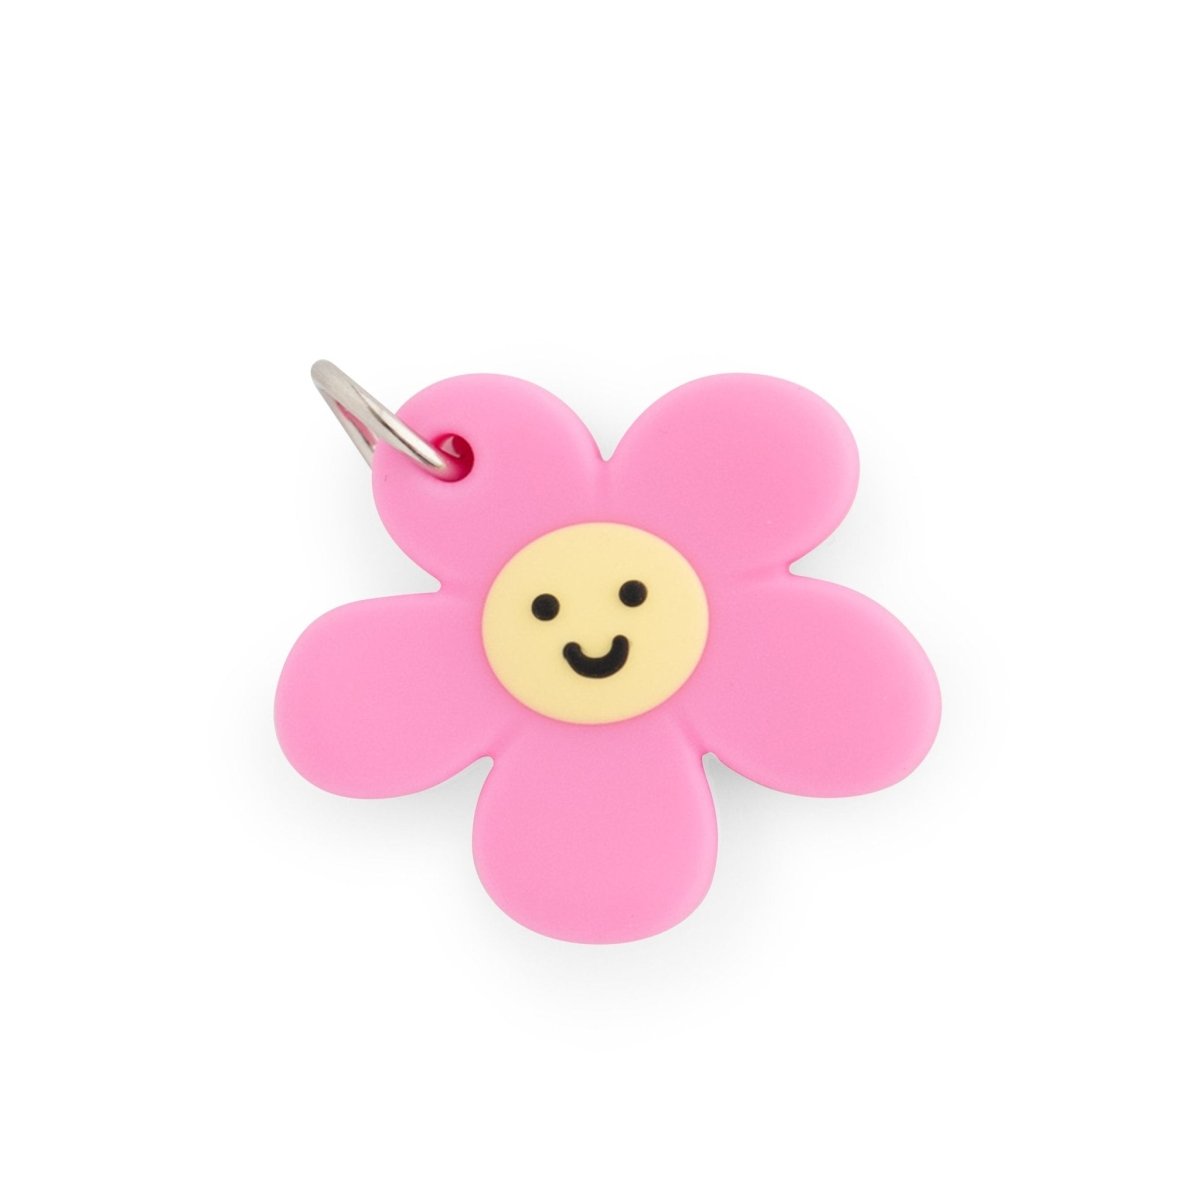 Silicone Charms Flowers Cotton Candy Pink from Cara & Co Craft Supply